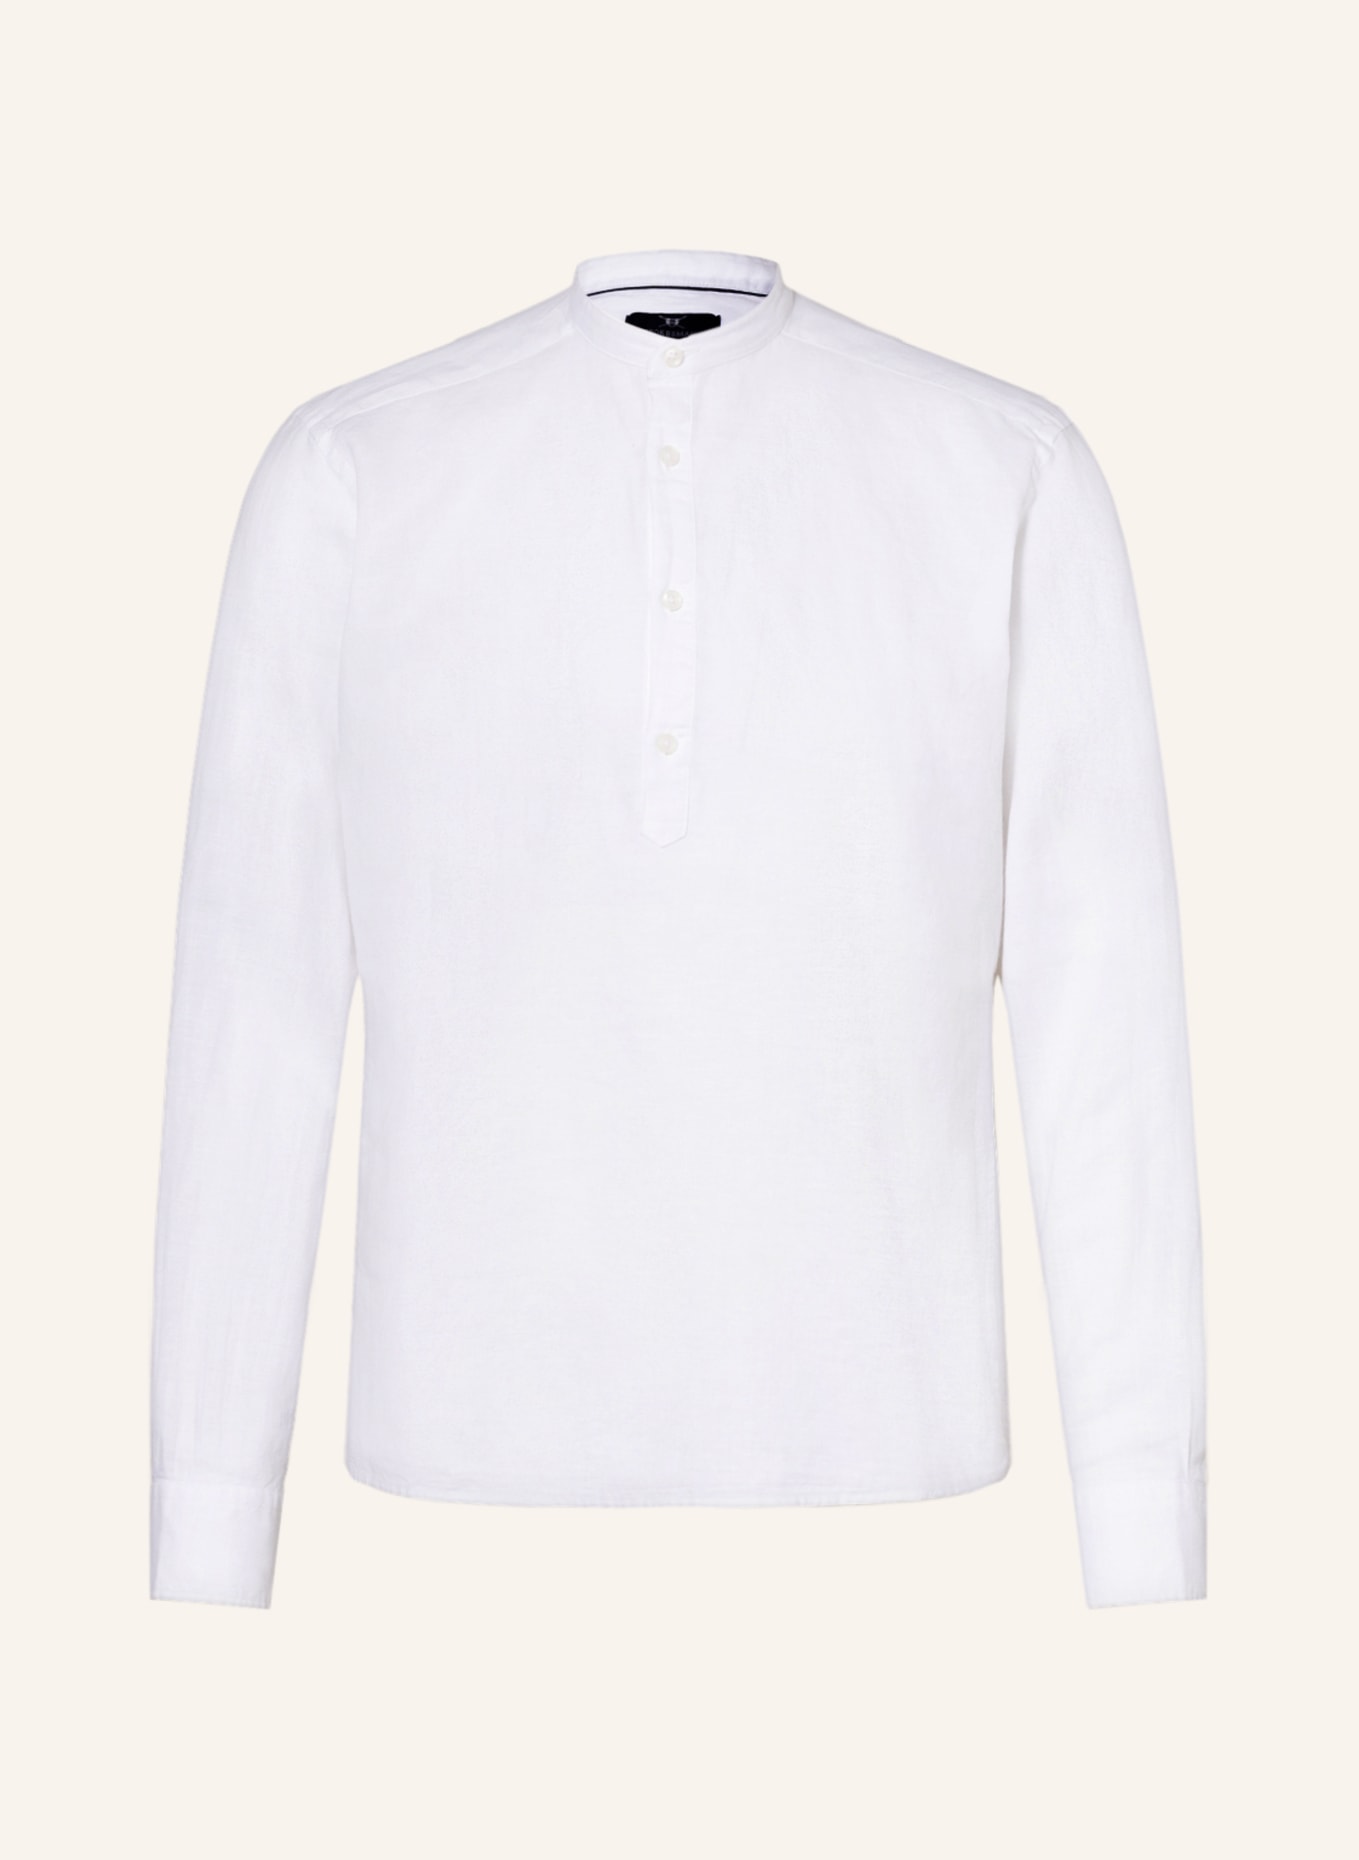 STROKESMAN'S Shirt regular fit with linen, Color: WHITE (Image 1)